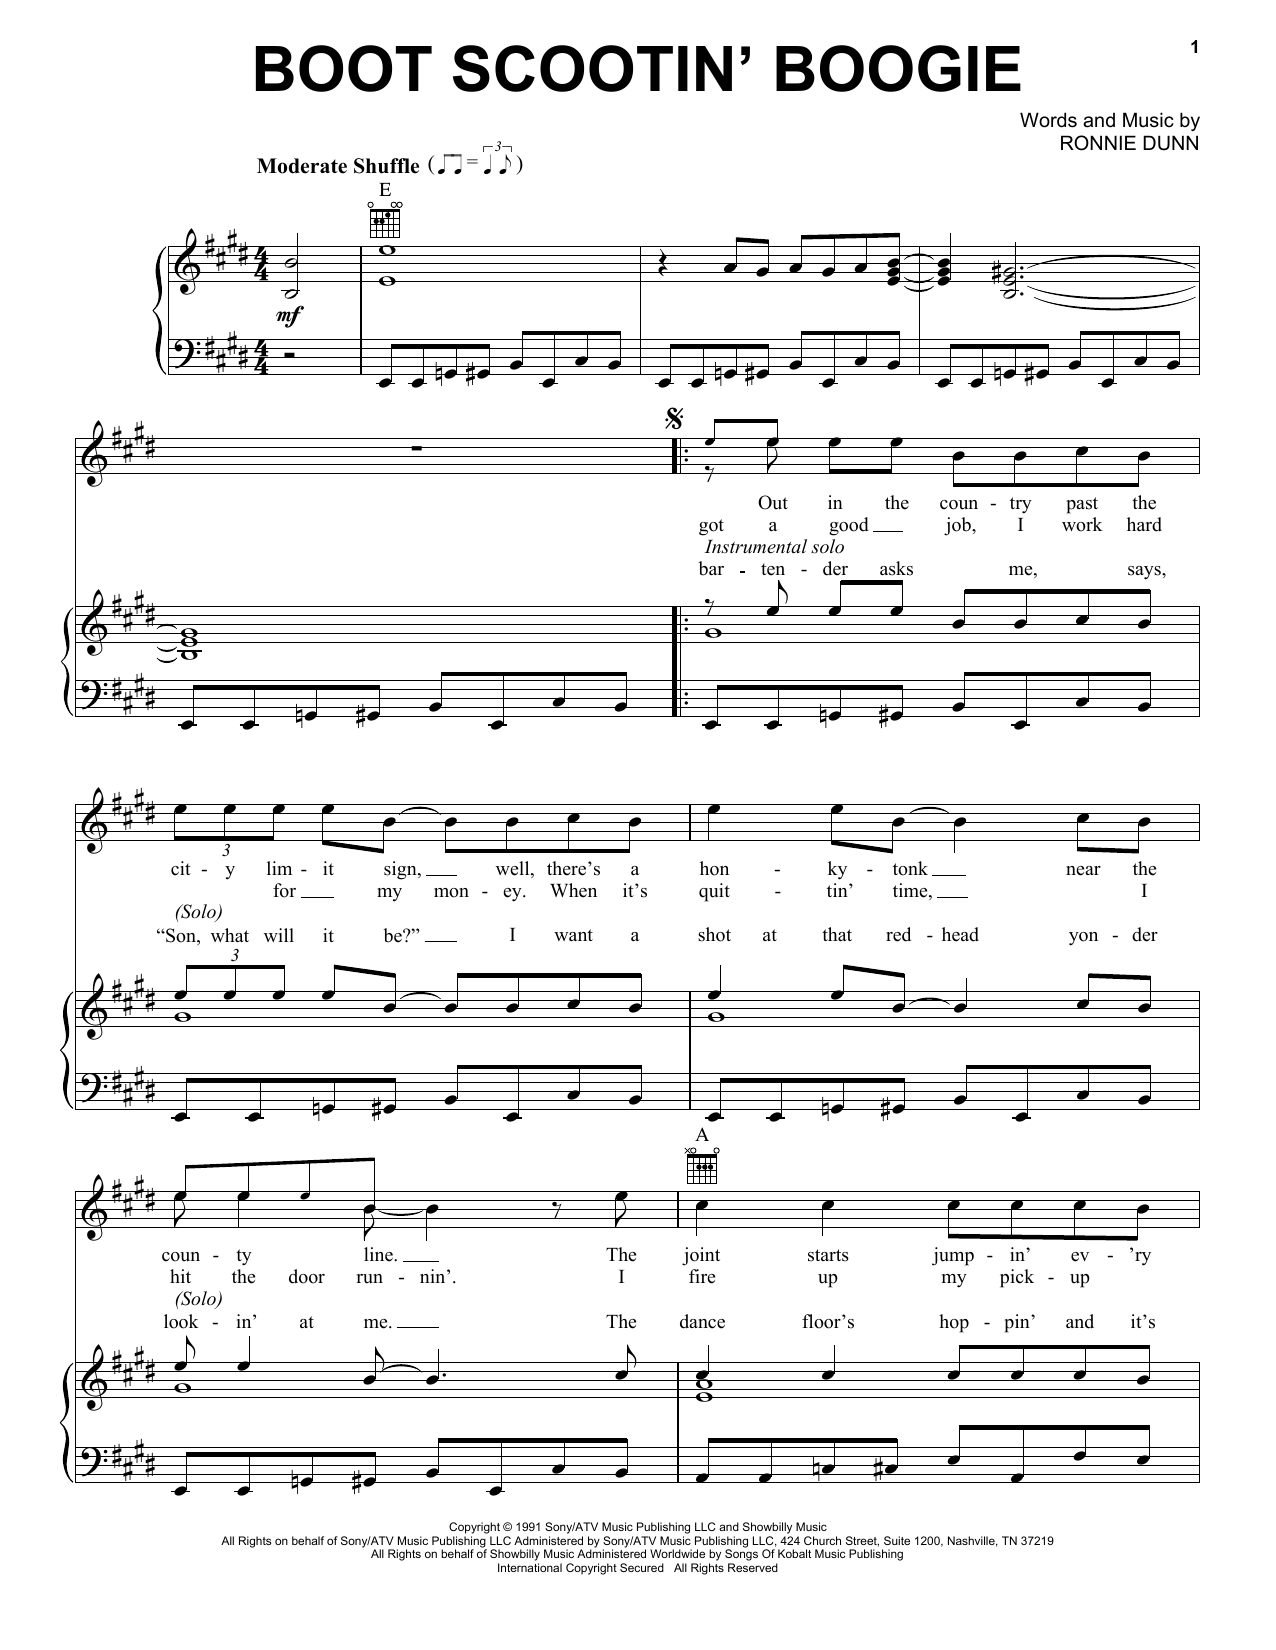 Brooks & Dunn Boot Scootin' Boogie sheet music notes and chords. Download Printable PDF.